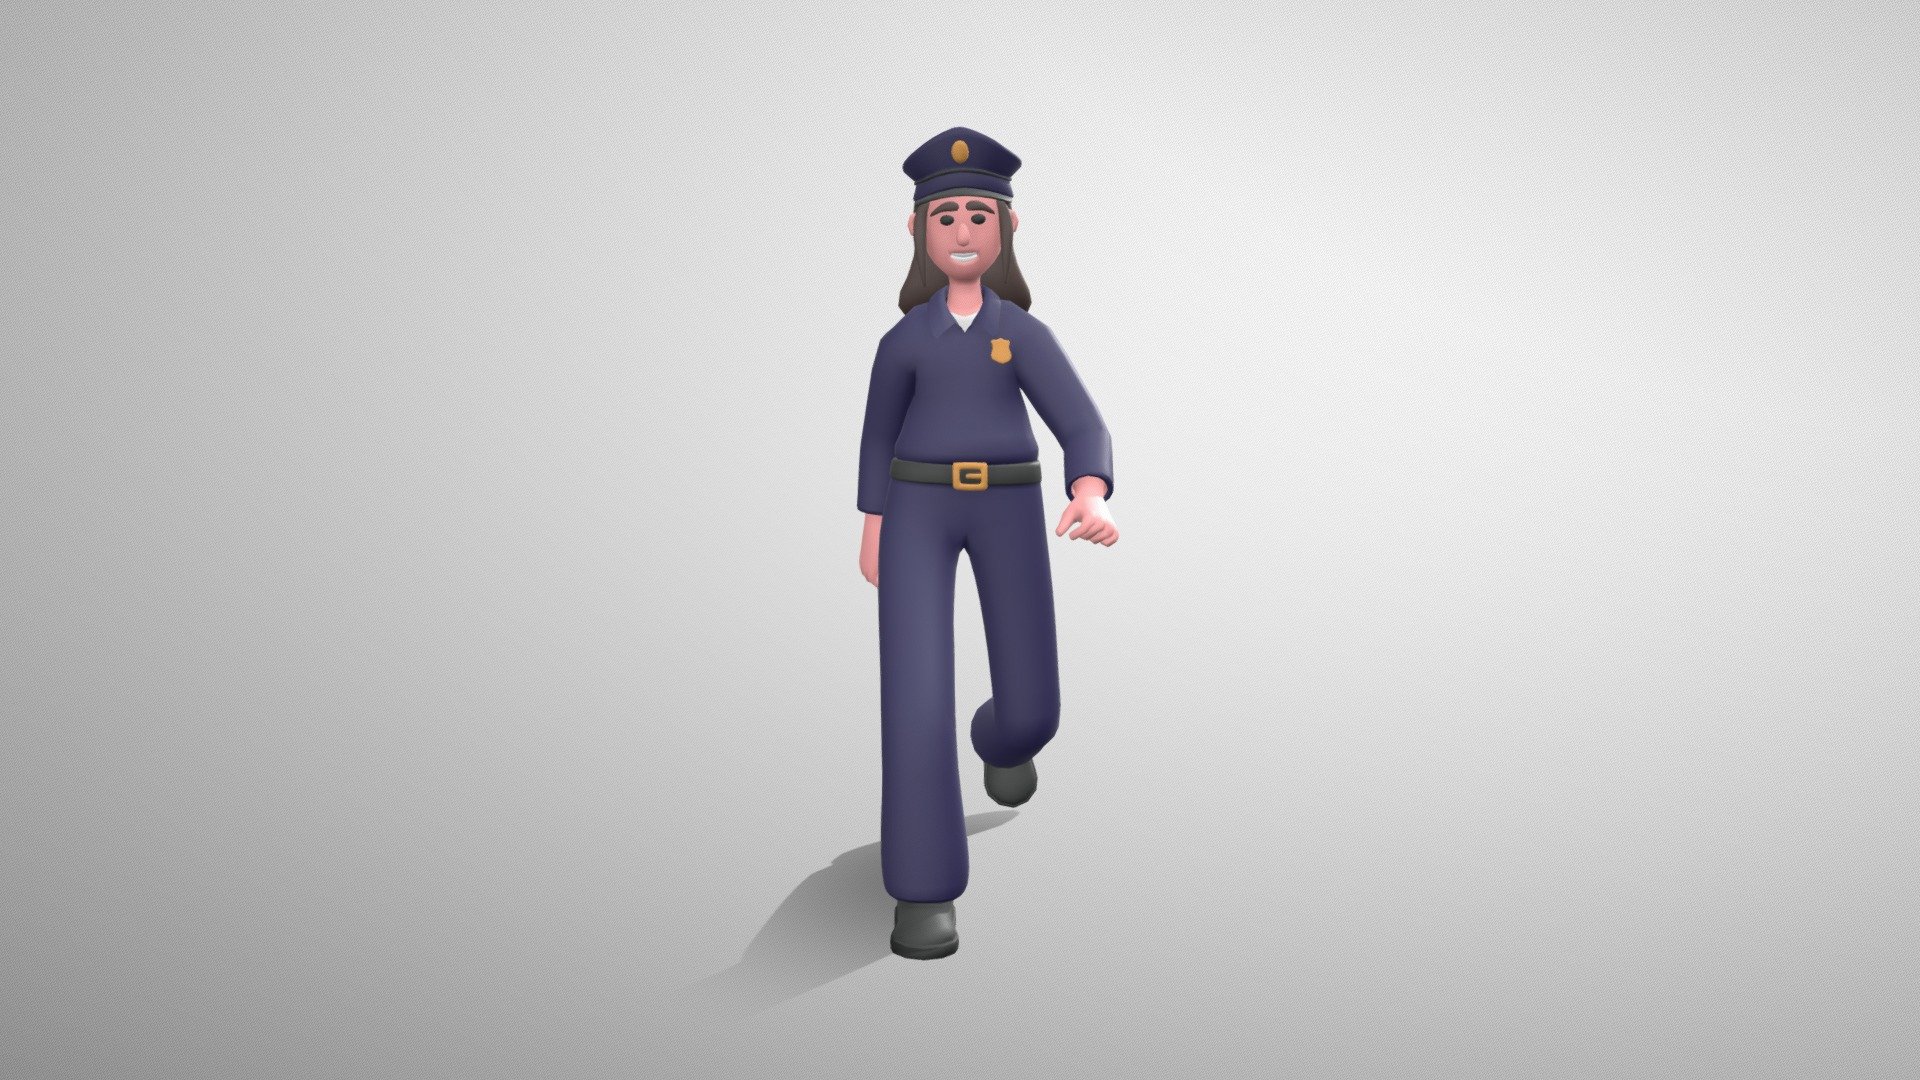 Stylized Girl Police Officer is the part of the big characters bundle. These stylized 3D characters might be useful for motion graphics design, cartoon production, game development, illustrations and many other industries.

The 3D model is rigged and ready to use with Mixamo. You can apply any Mixamo animation in one click . We also added 12 widely used animations.

The character model is well optimized and subdivision ready. You can choose any smoothing option you want, according to your project.

The model has only a single texture. It is useful for mobile game development and it's easy to change colors of clothes, skin etc.

If you have any questions or suggestions on improving our product, feel free to send a message to mail@dreamlab.net.ua - Stylized Girl Police - Mixamo Rigged Character - Buy Royalty Free 3D model by Dream Lab (@dreamlabanim) 3d model